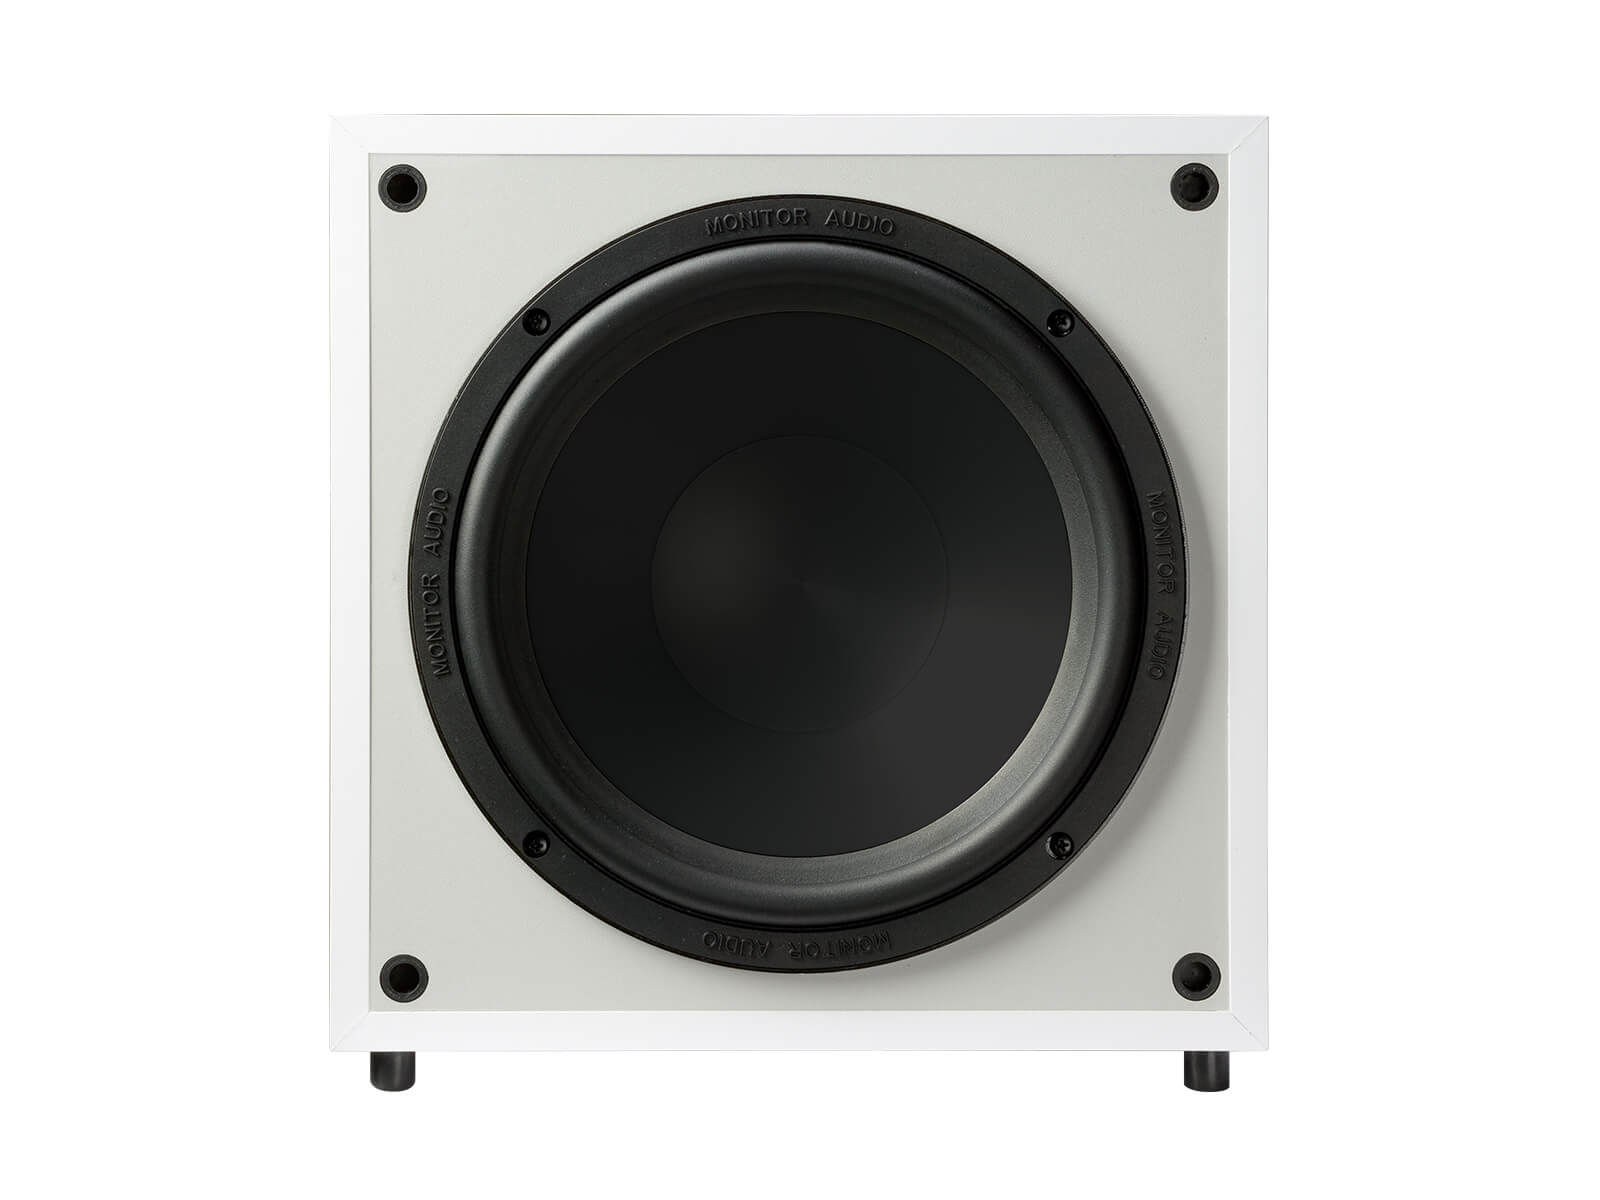 Monitor MRW-10, grille-less subwoofer, front on a white finish.